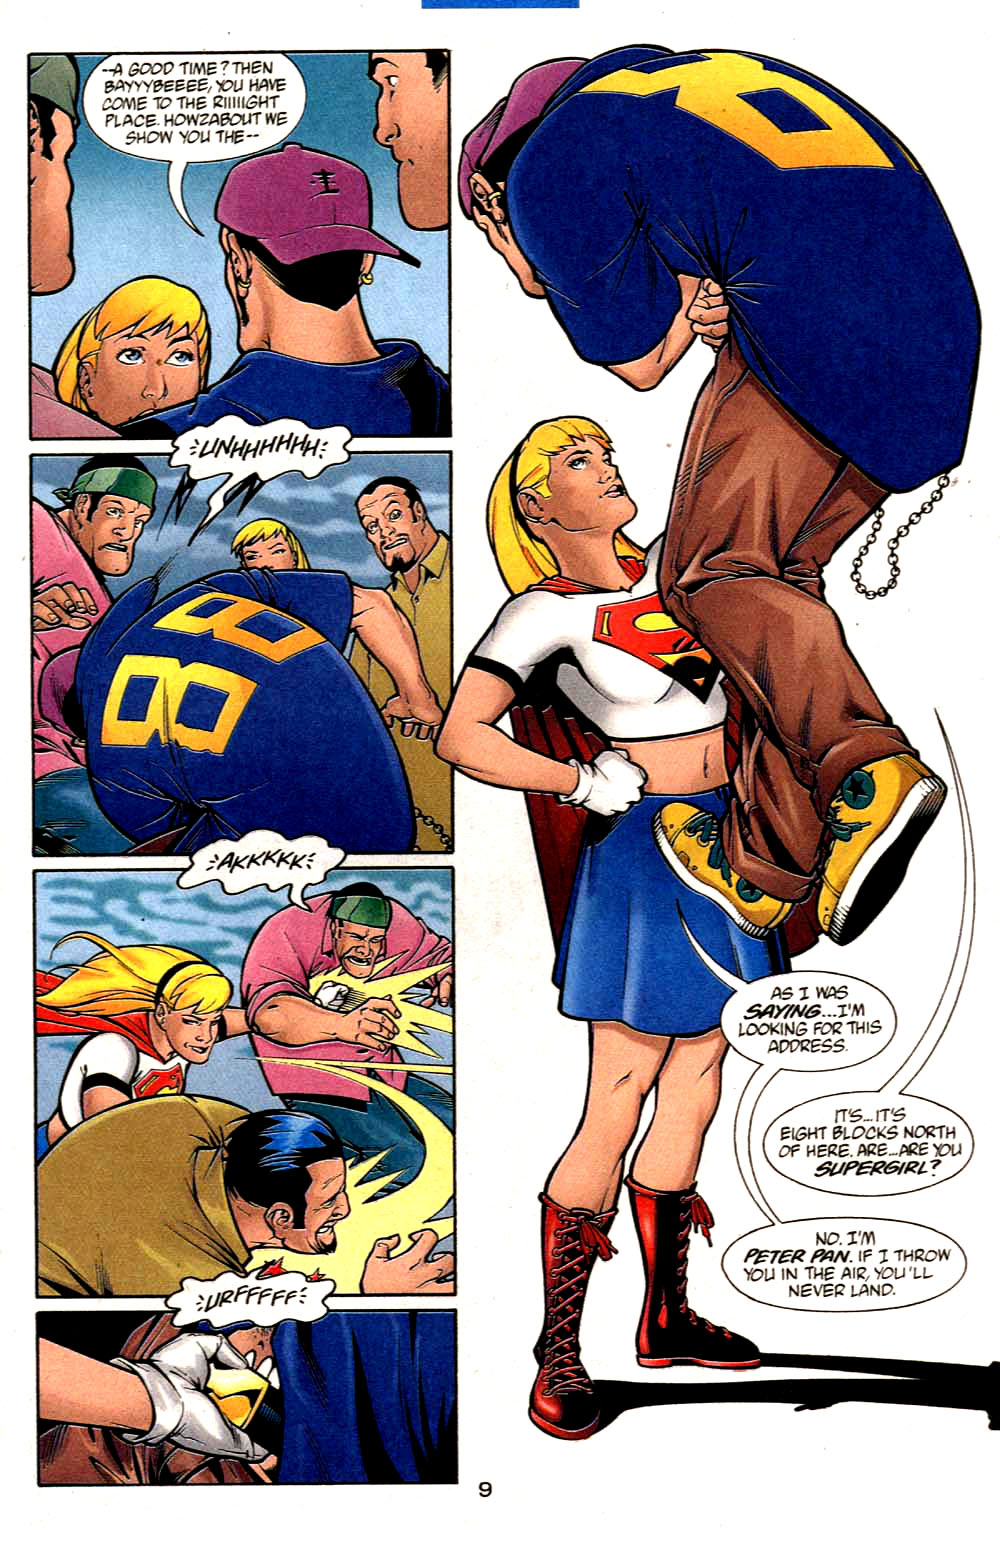 Supergirl (1996) 55 Page 9